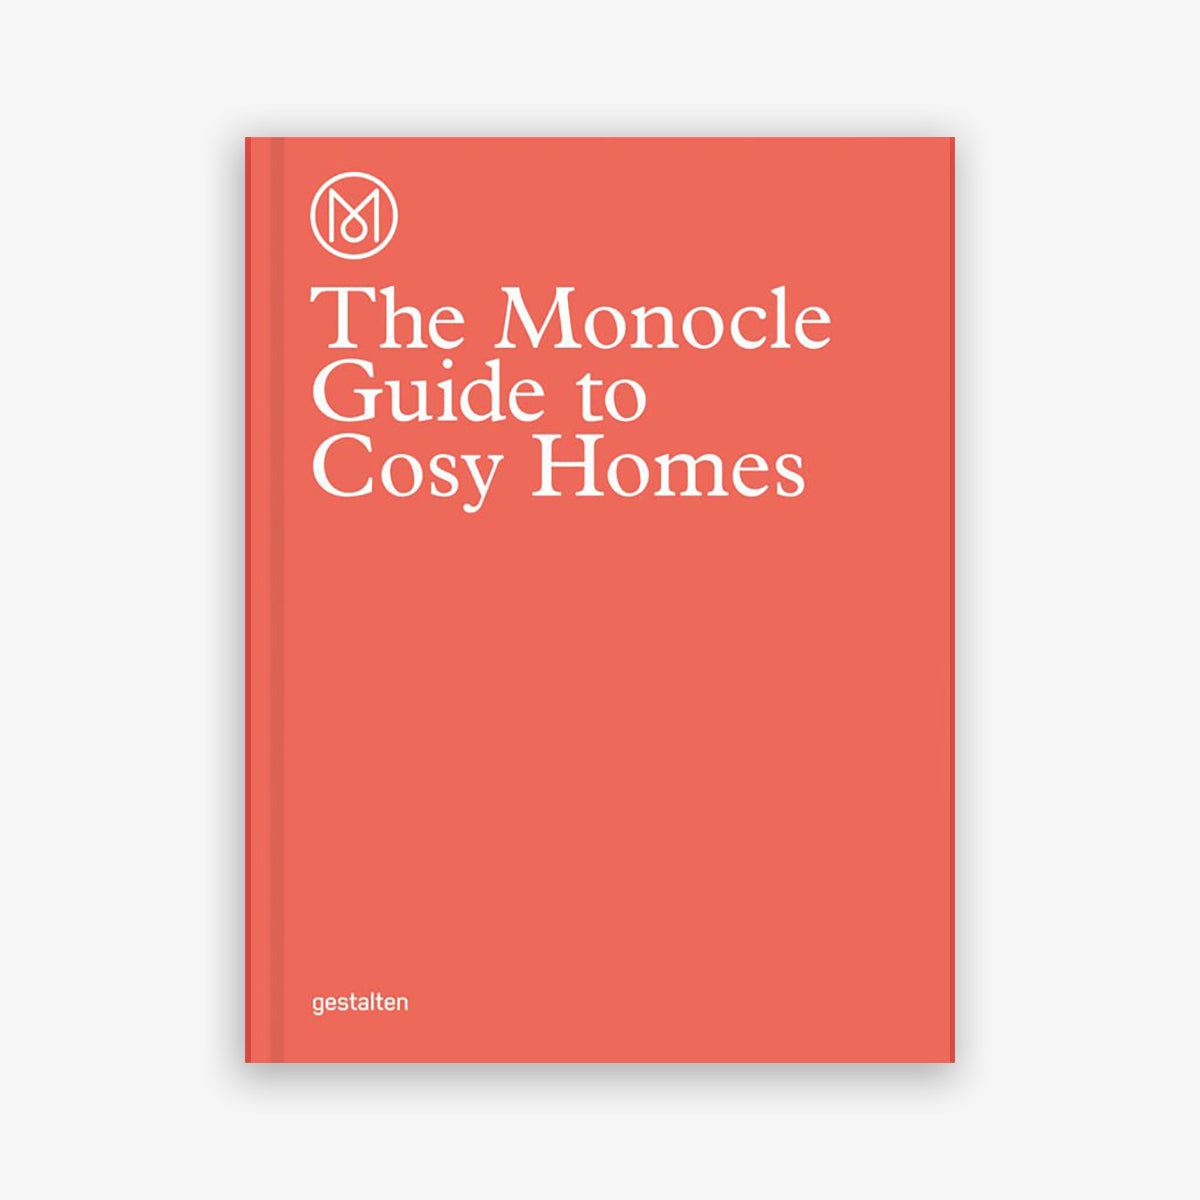 BOOK 'THE MONOCLE GUIDE TO COSY HOMES'